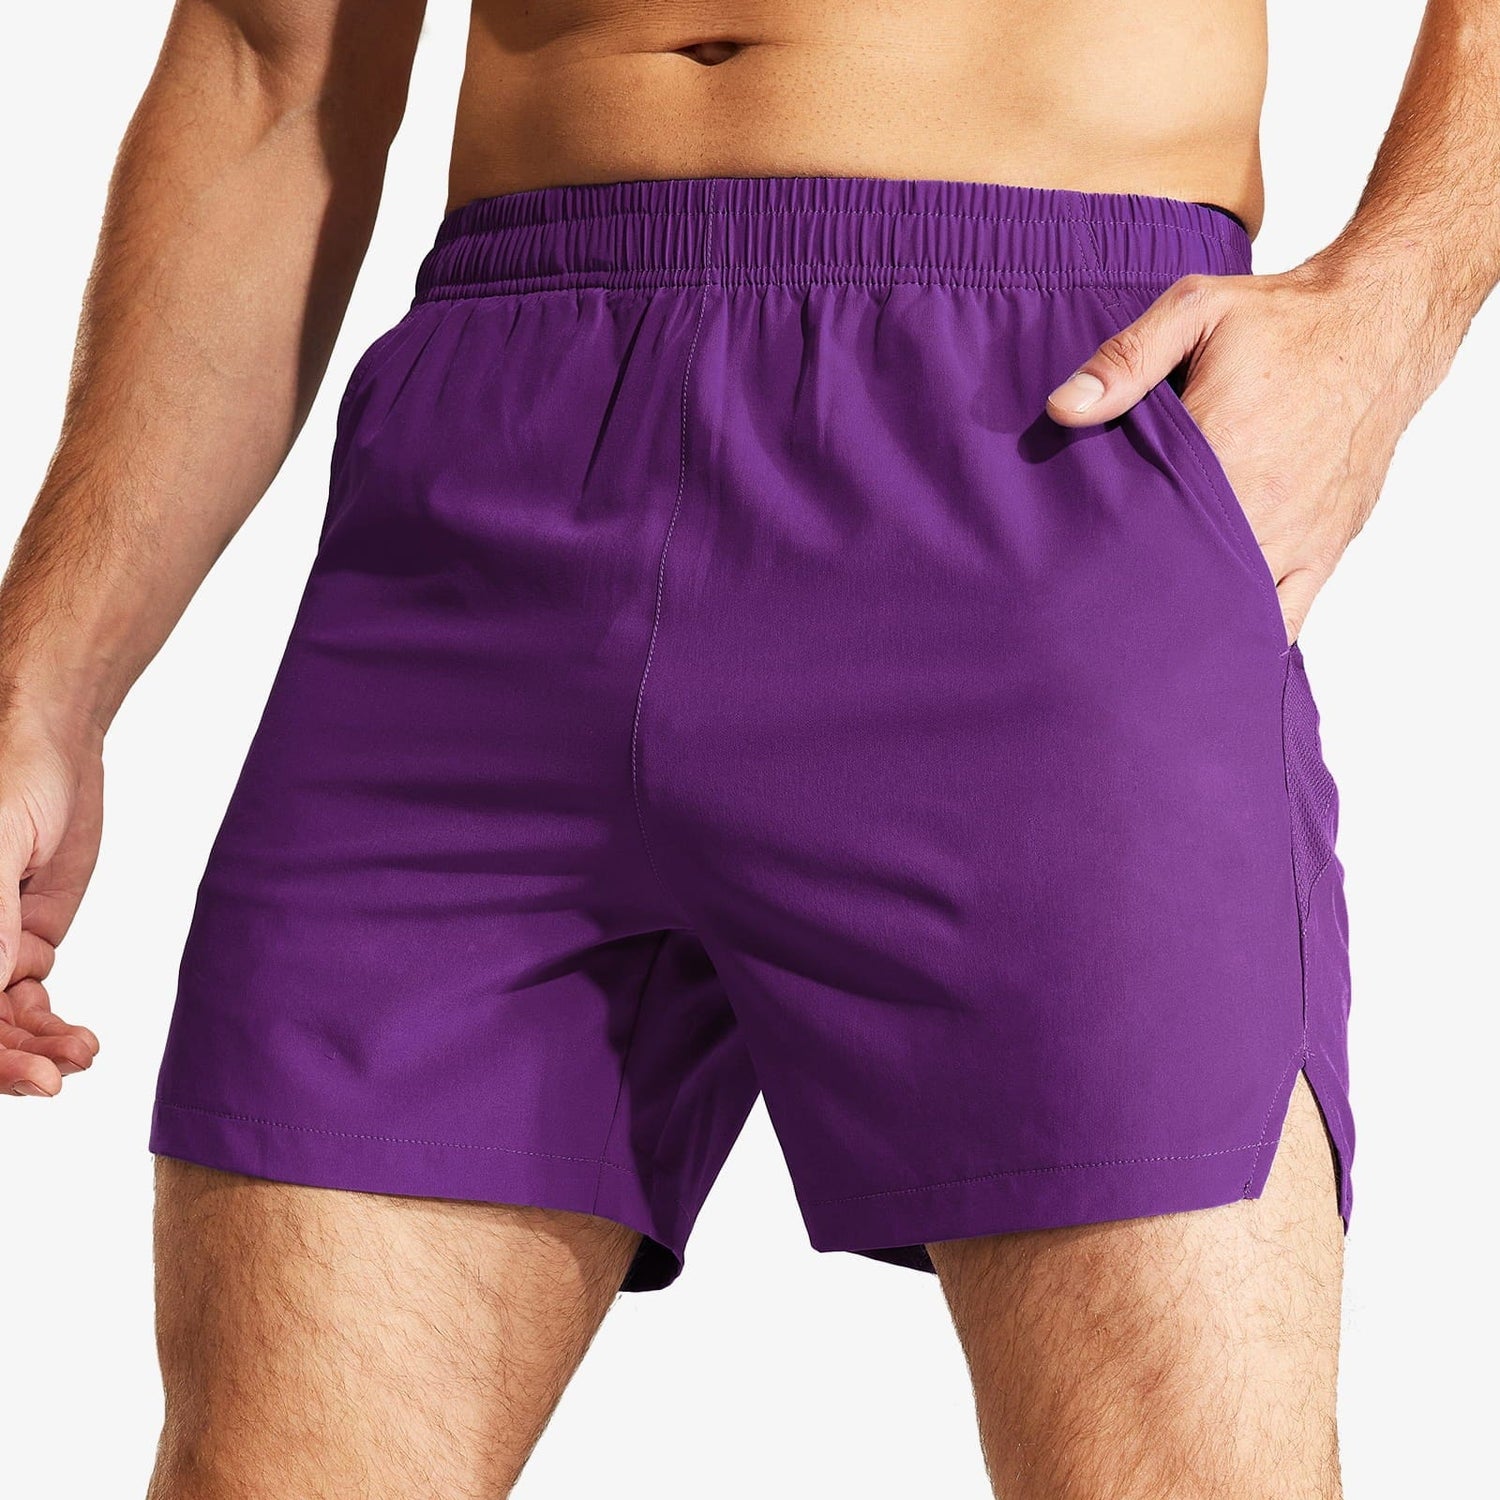 Men Workout Running Shorts 5 Inches Active Shorts with Pockets Men&